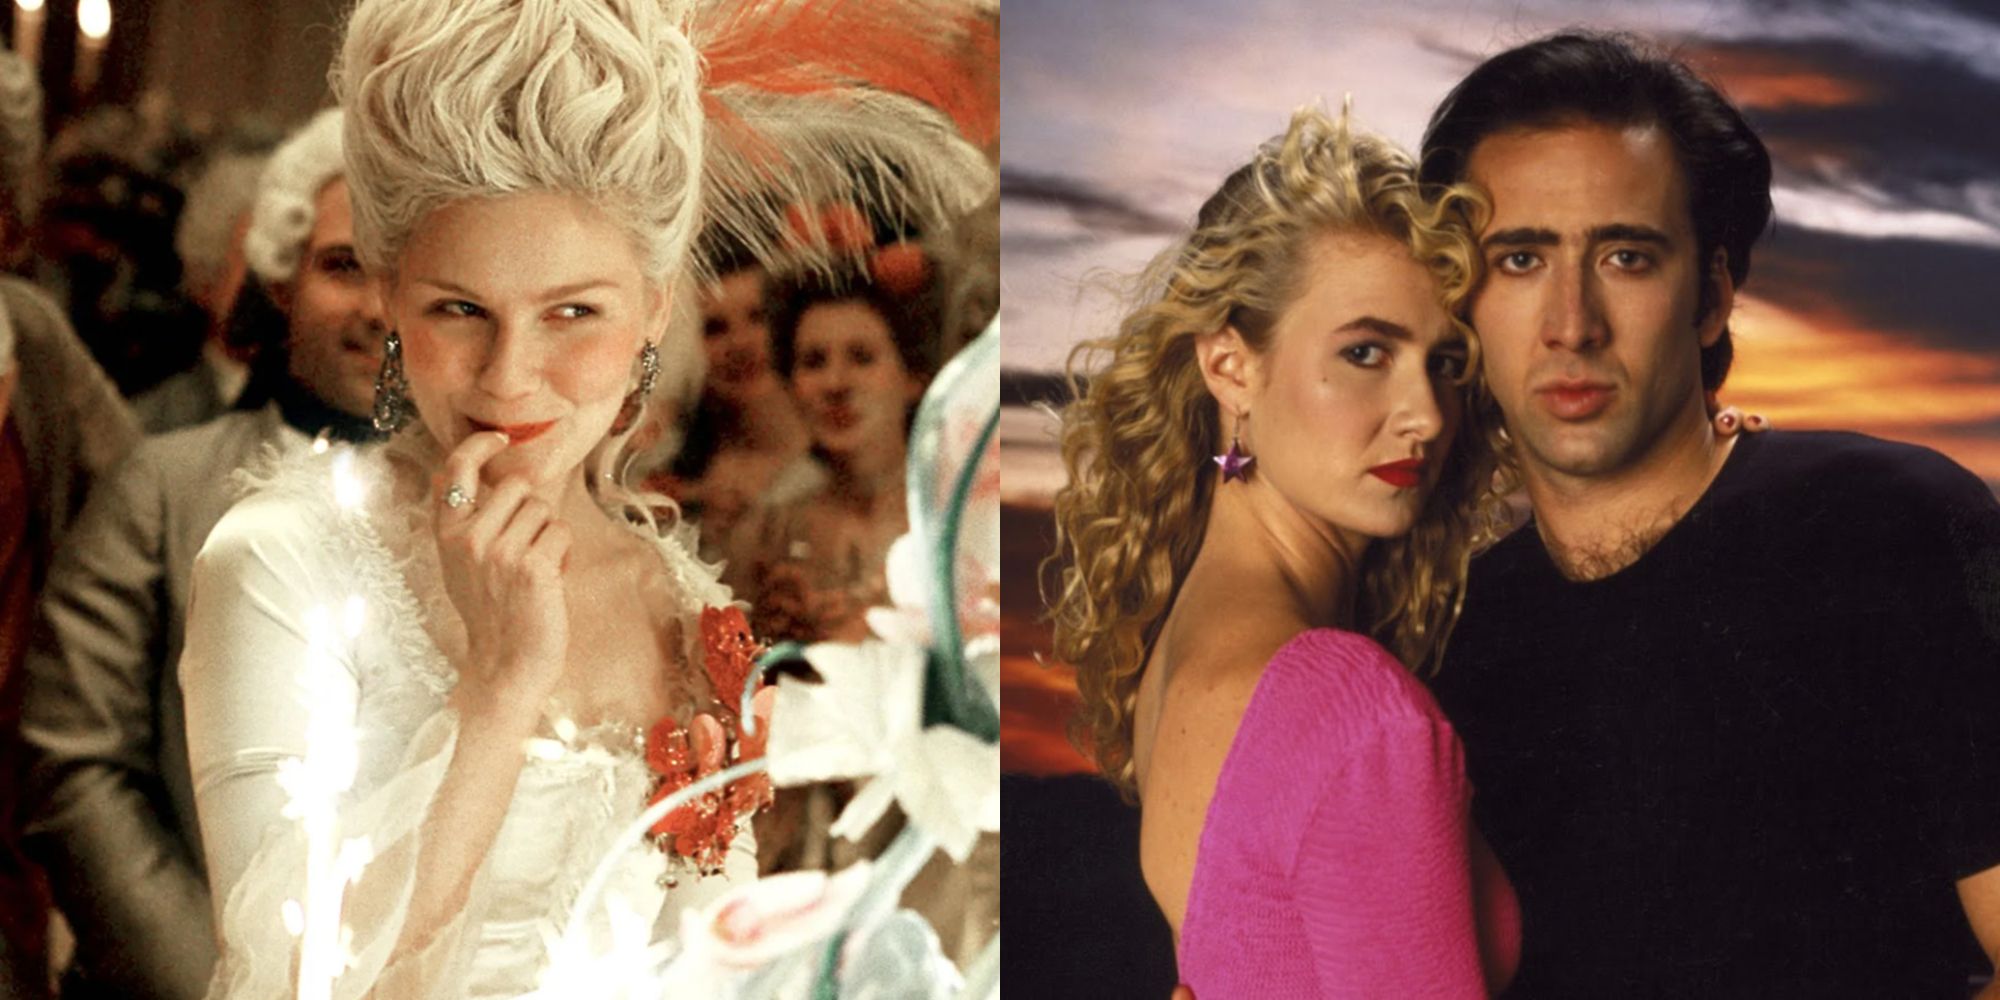 Split image showing characters from Marie Antoinette and Wild at Heart.